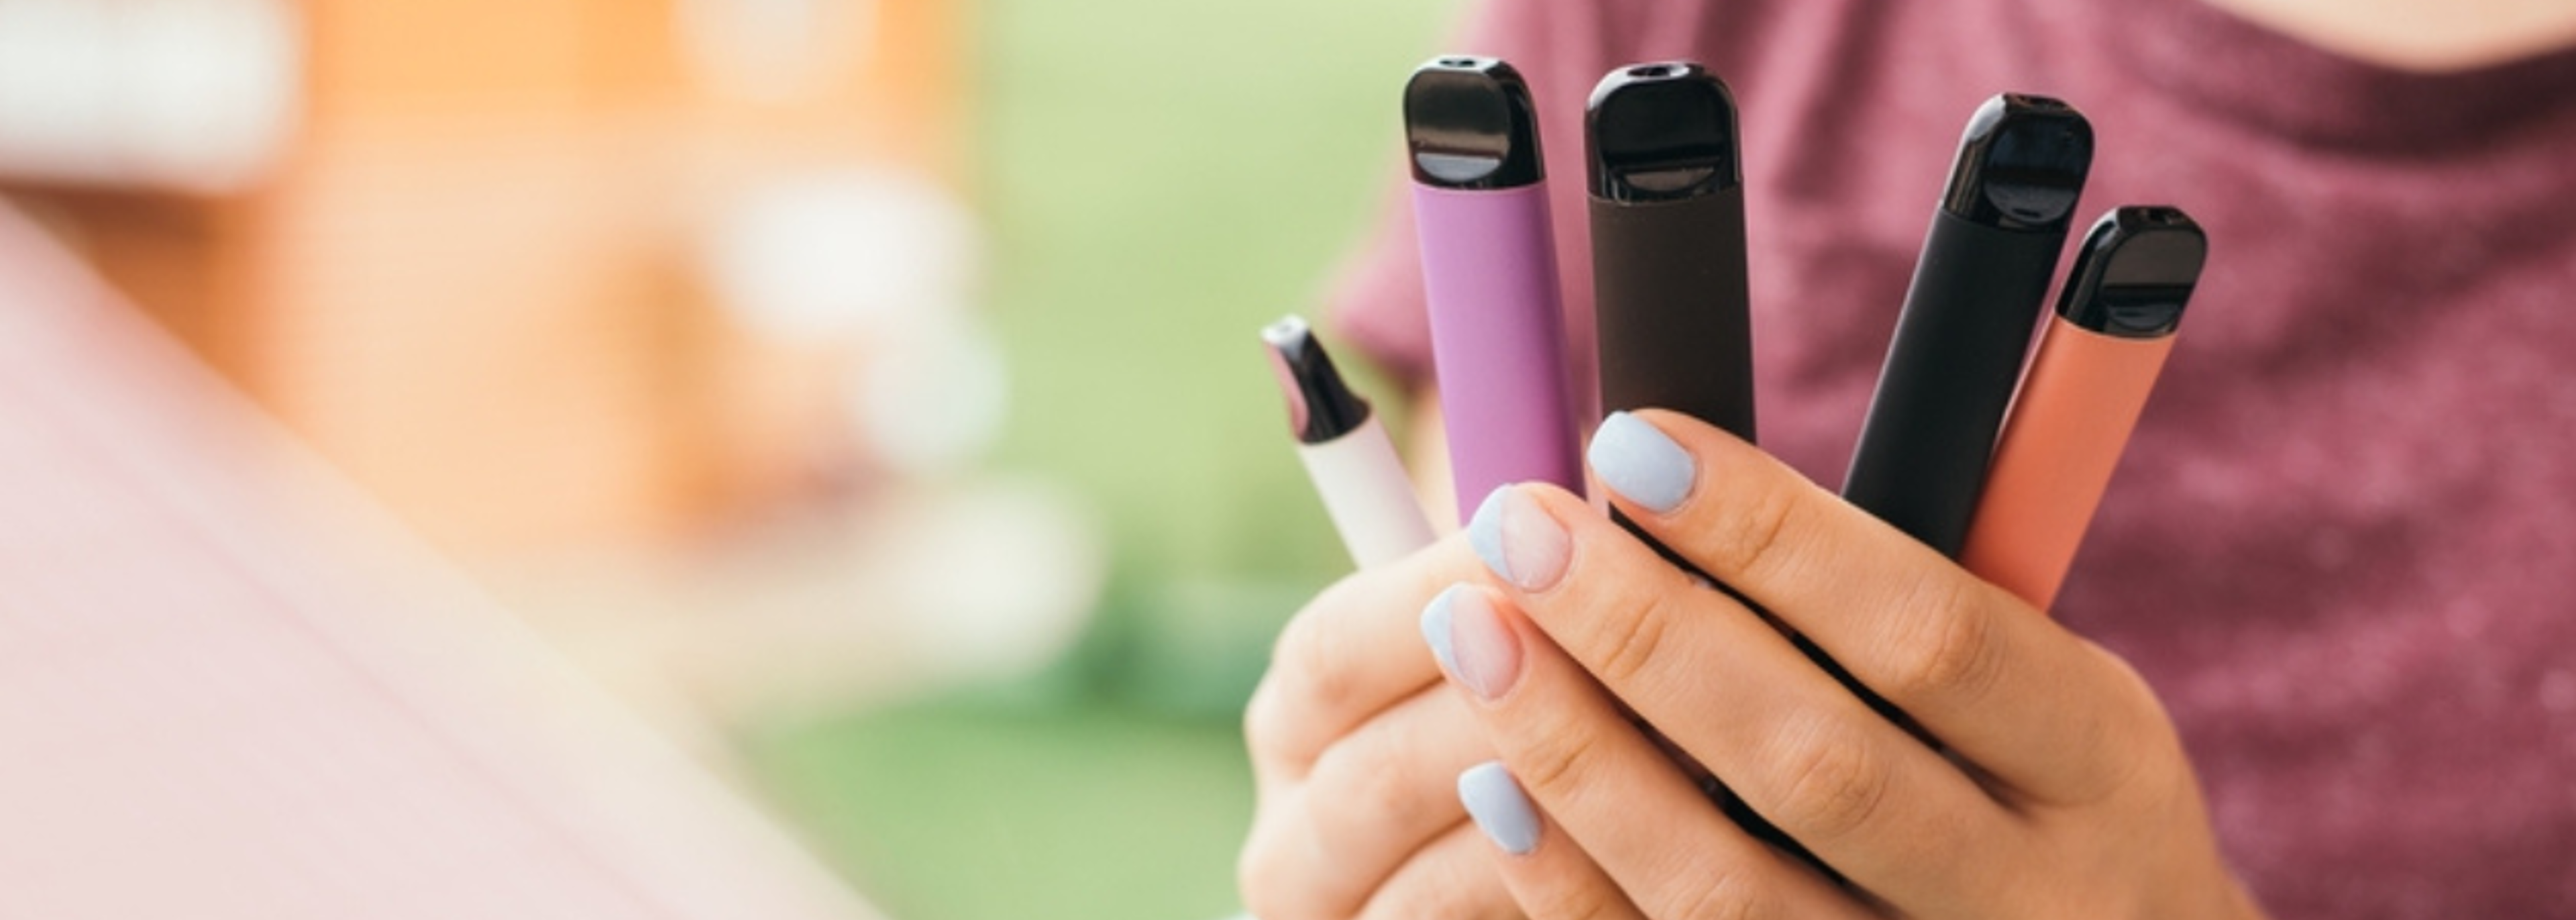 Free vapes at hospitals could save thousands of lives